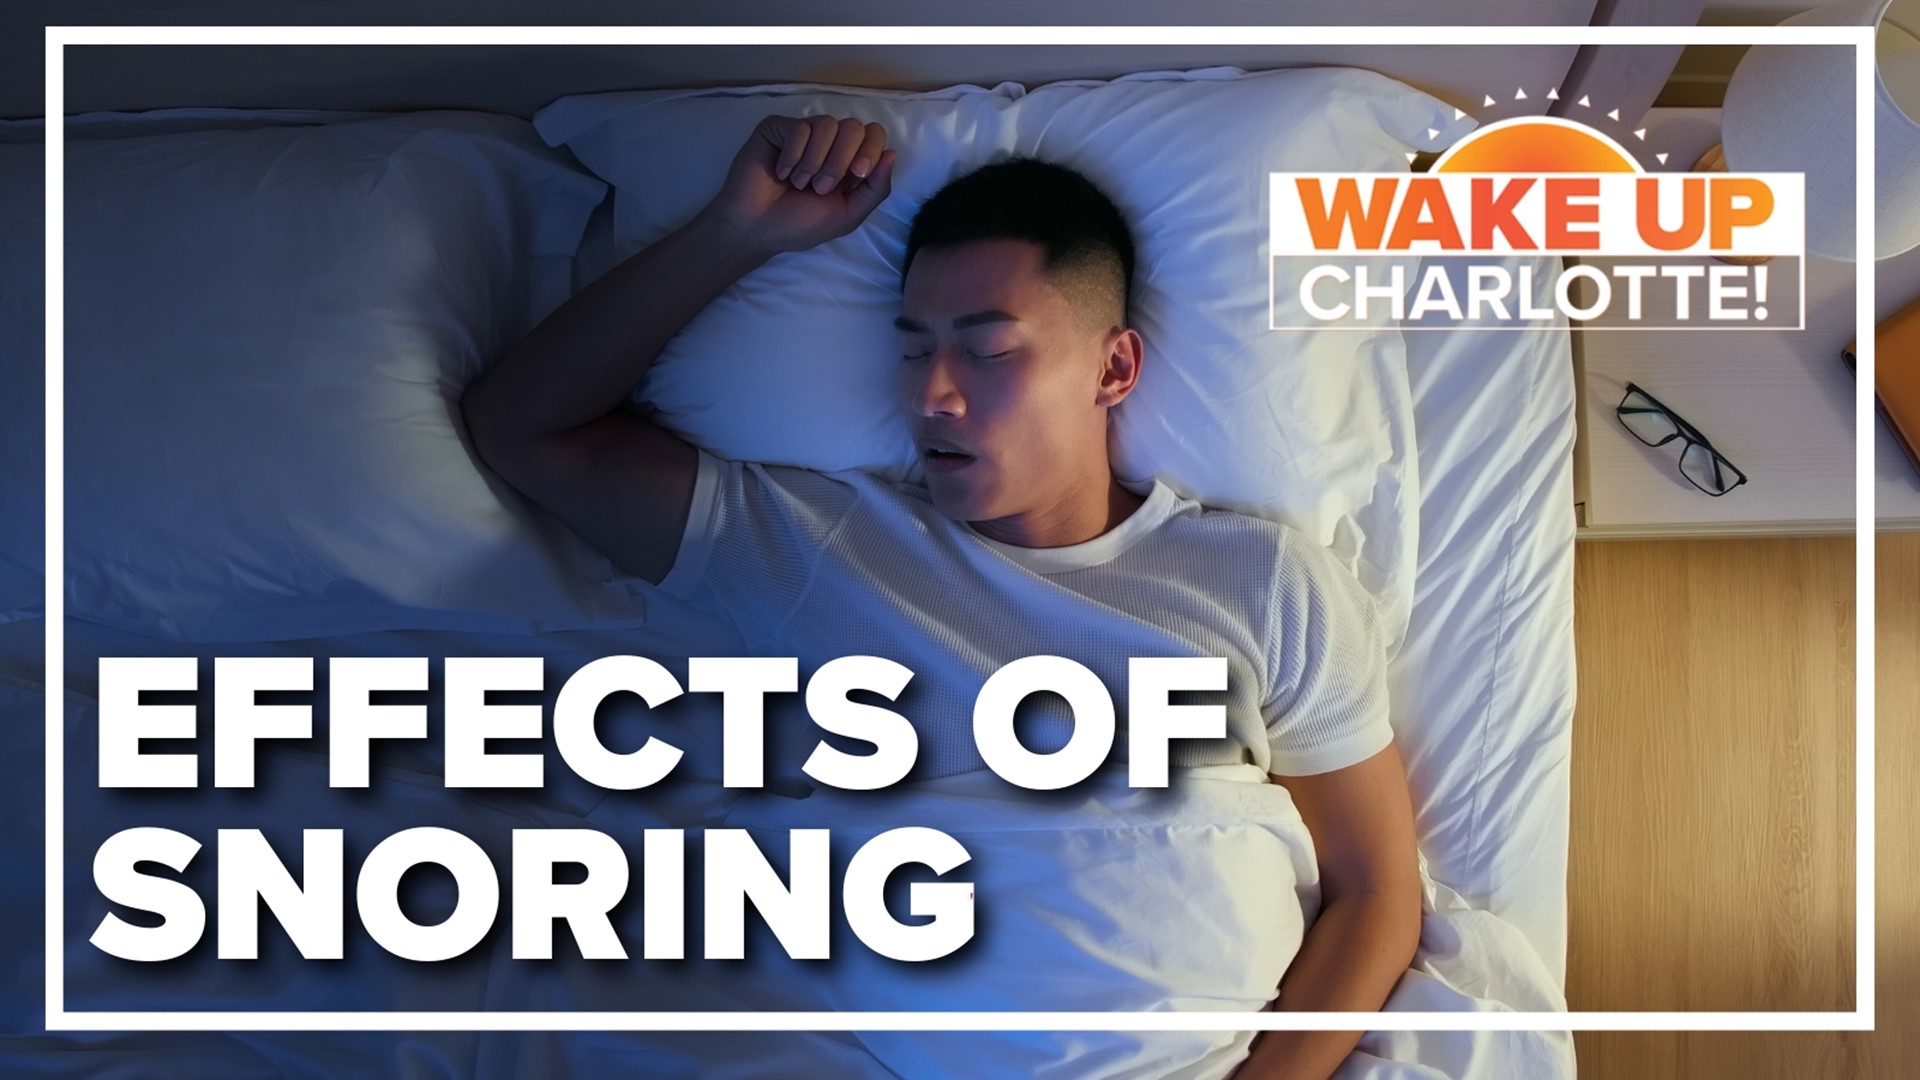 Studies show about one in five people suffer from snoring, but only about 3% get treatment.